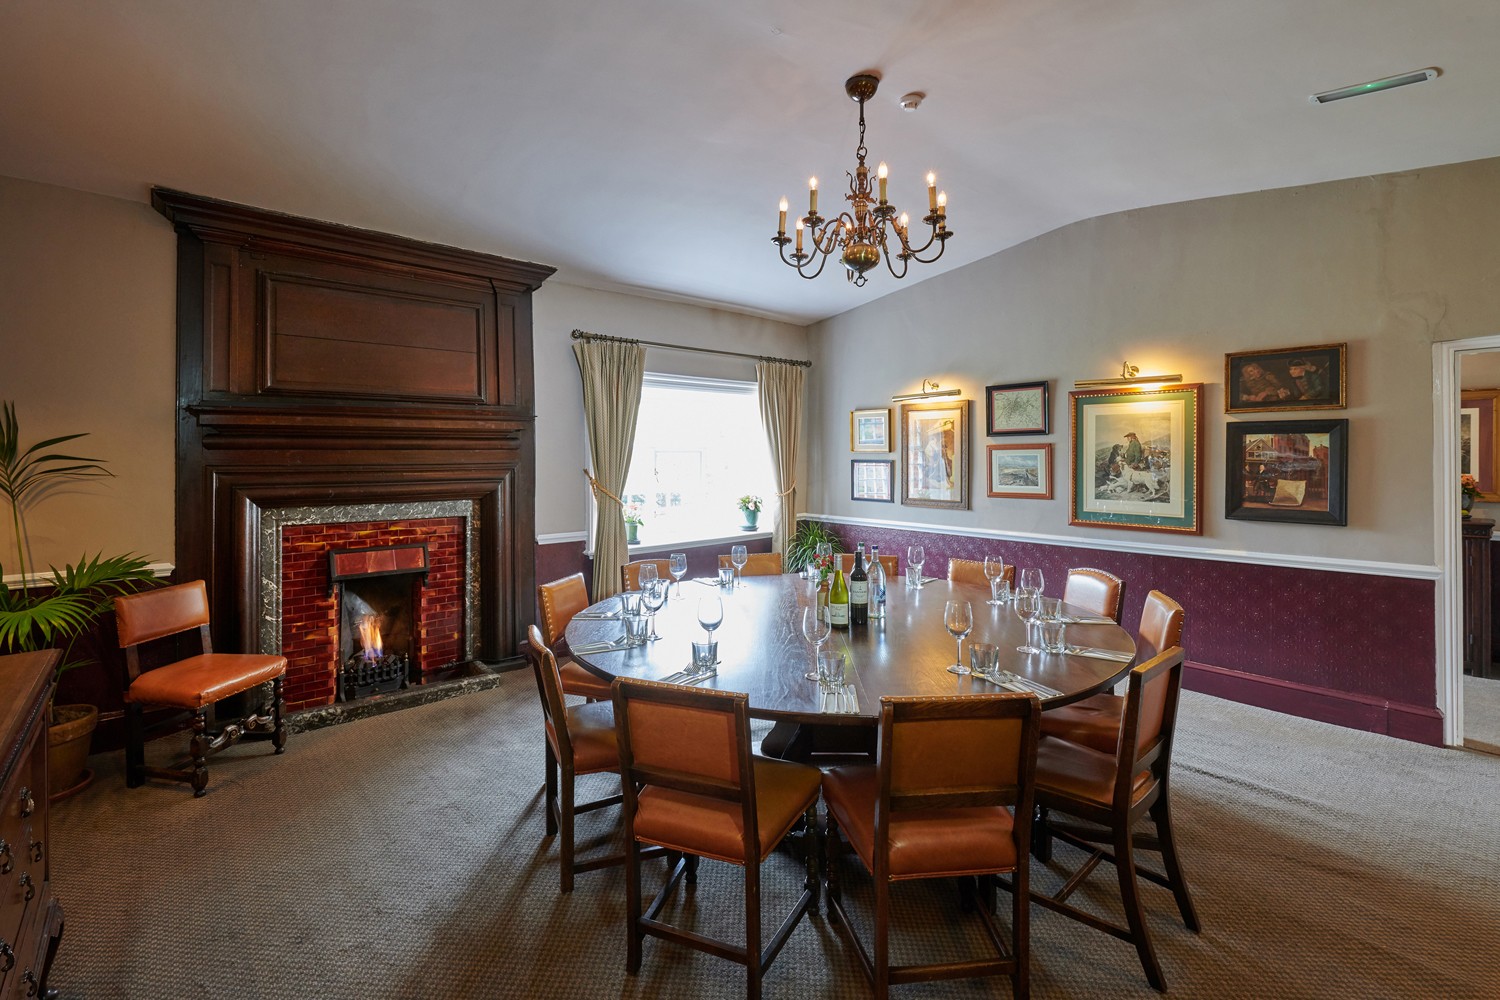 The Private Dining Room Room at Worsley Old Hall